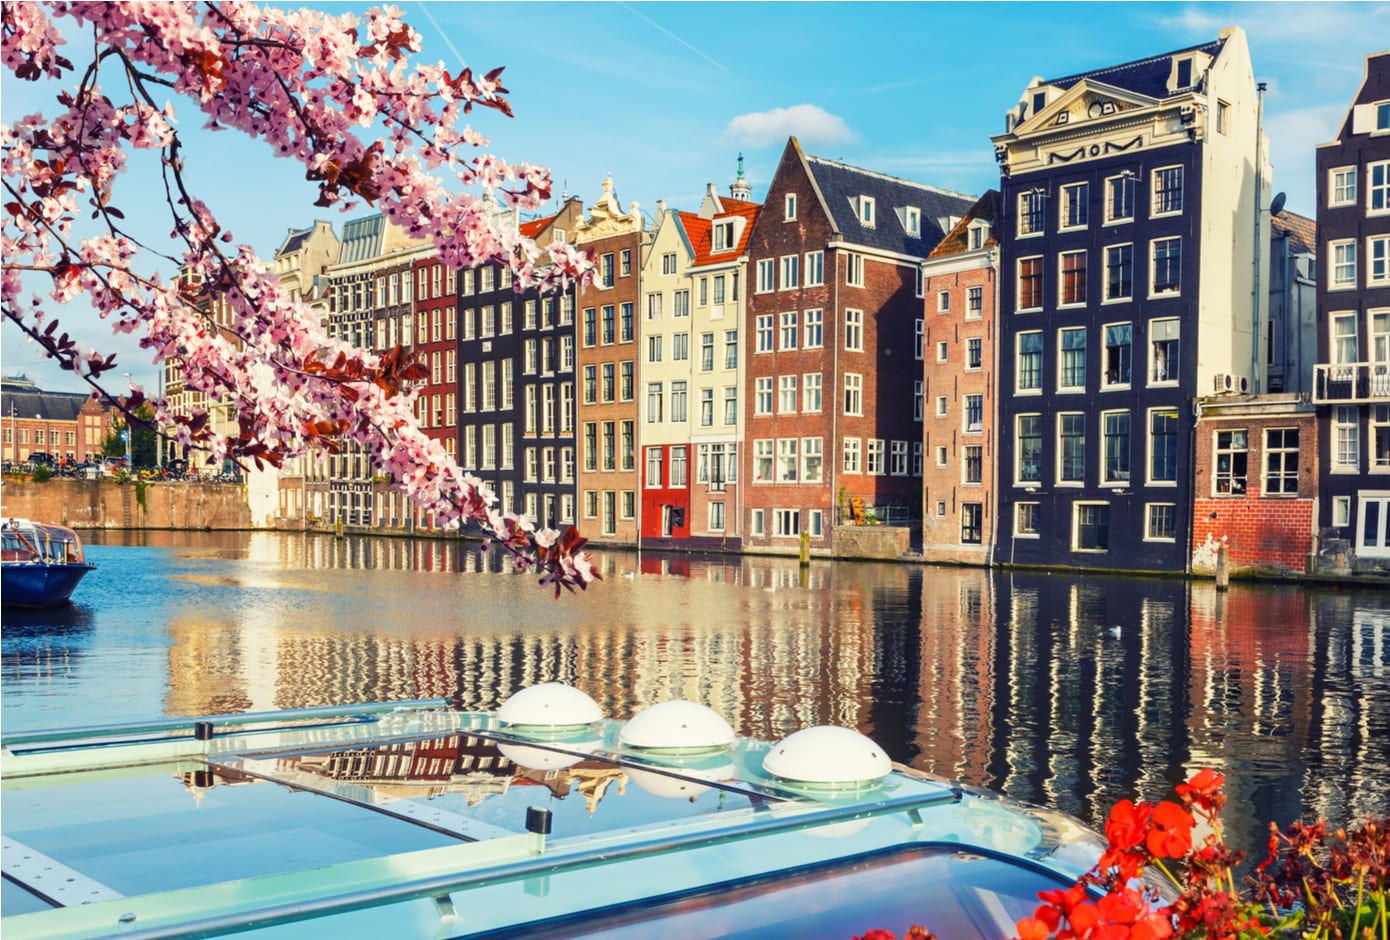 A cherry blossom tree in front of a typical Amsterdam canal lined with houses.